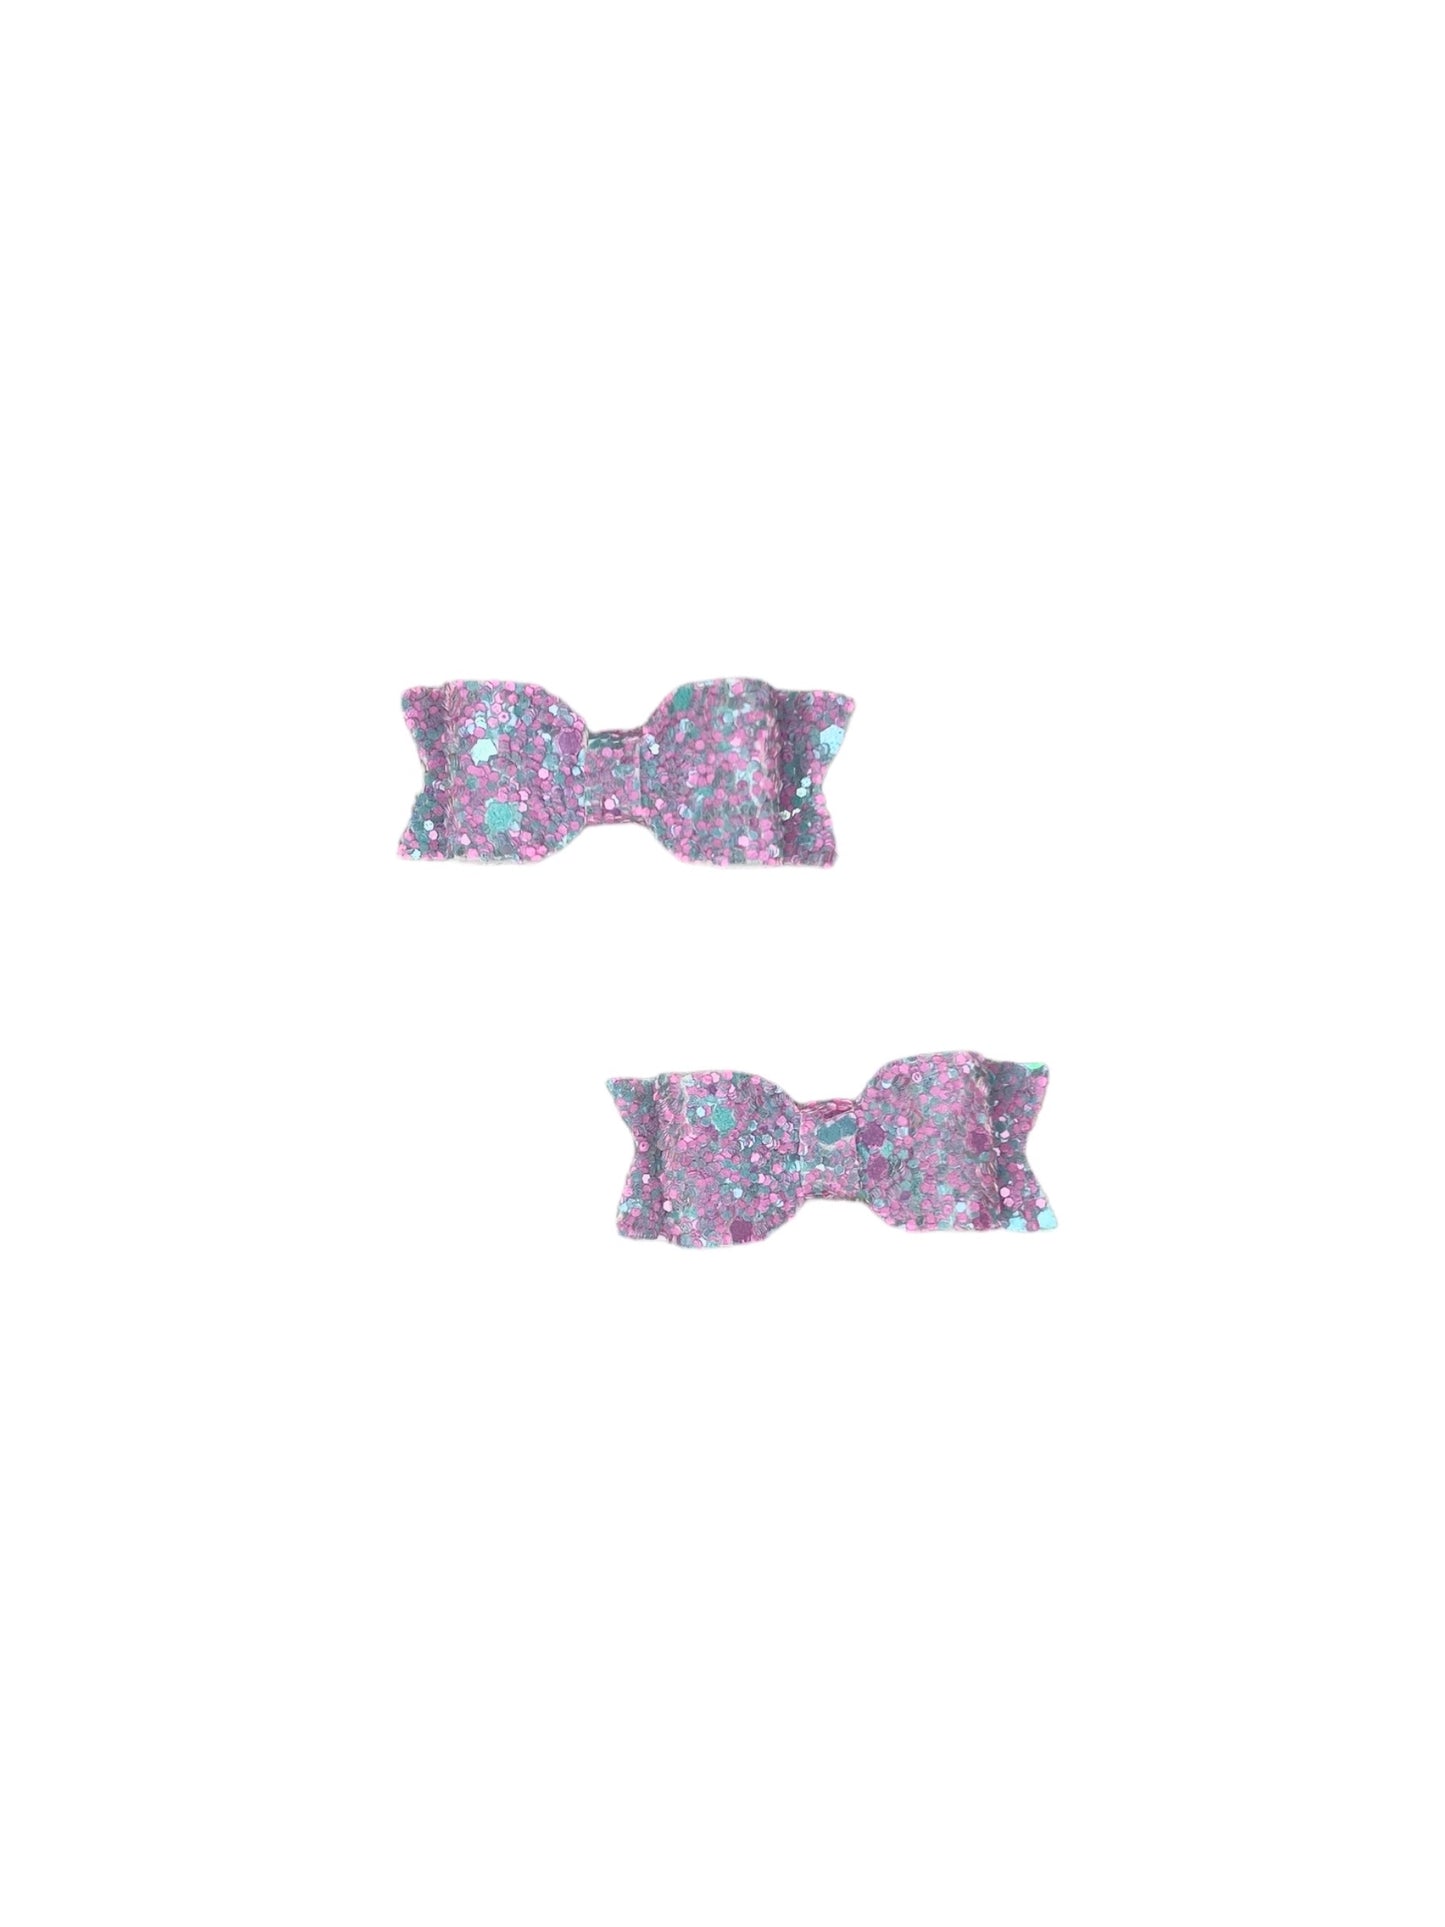 Purple and Turquoise Glitter Micro Pigtail Bows!